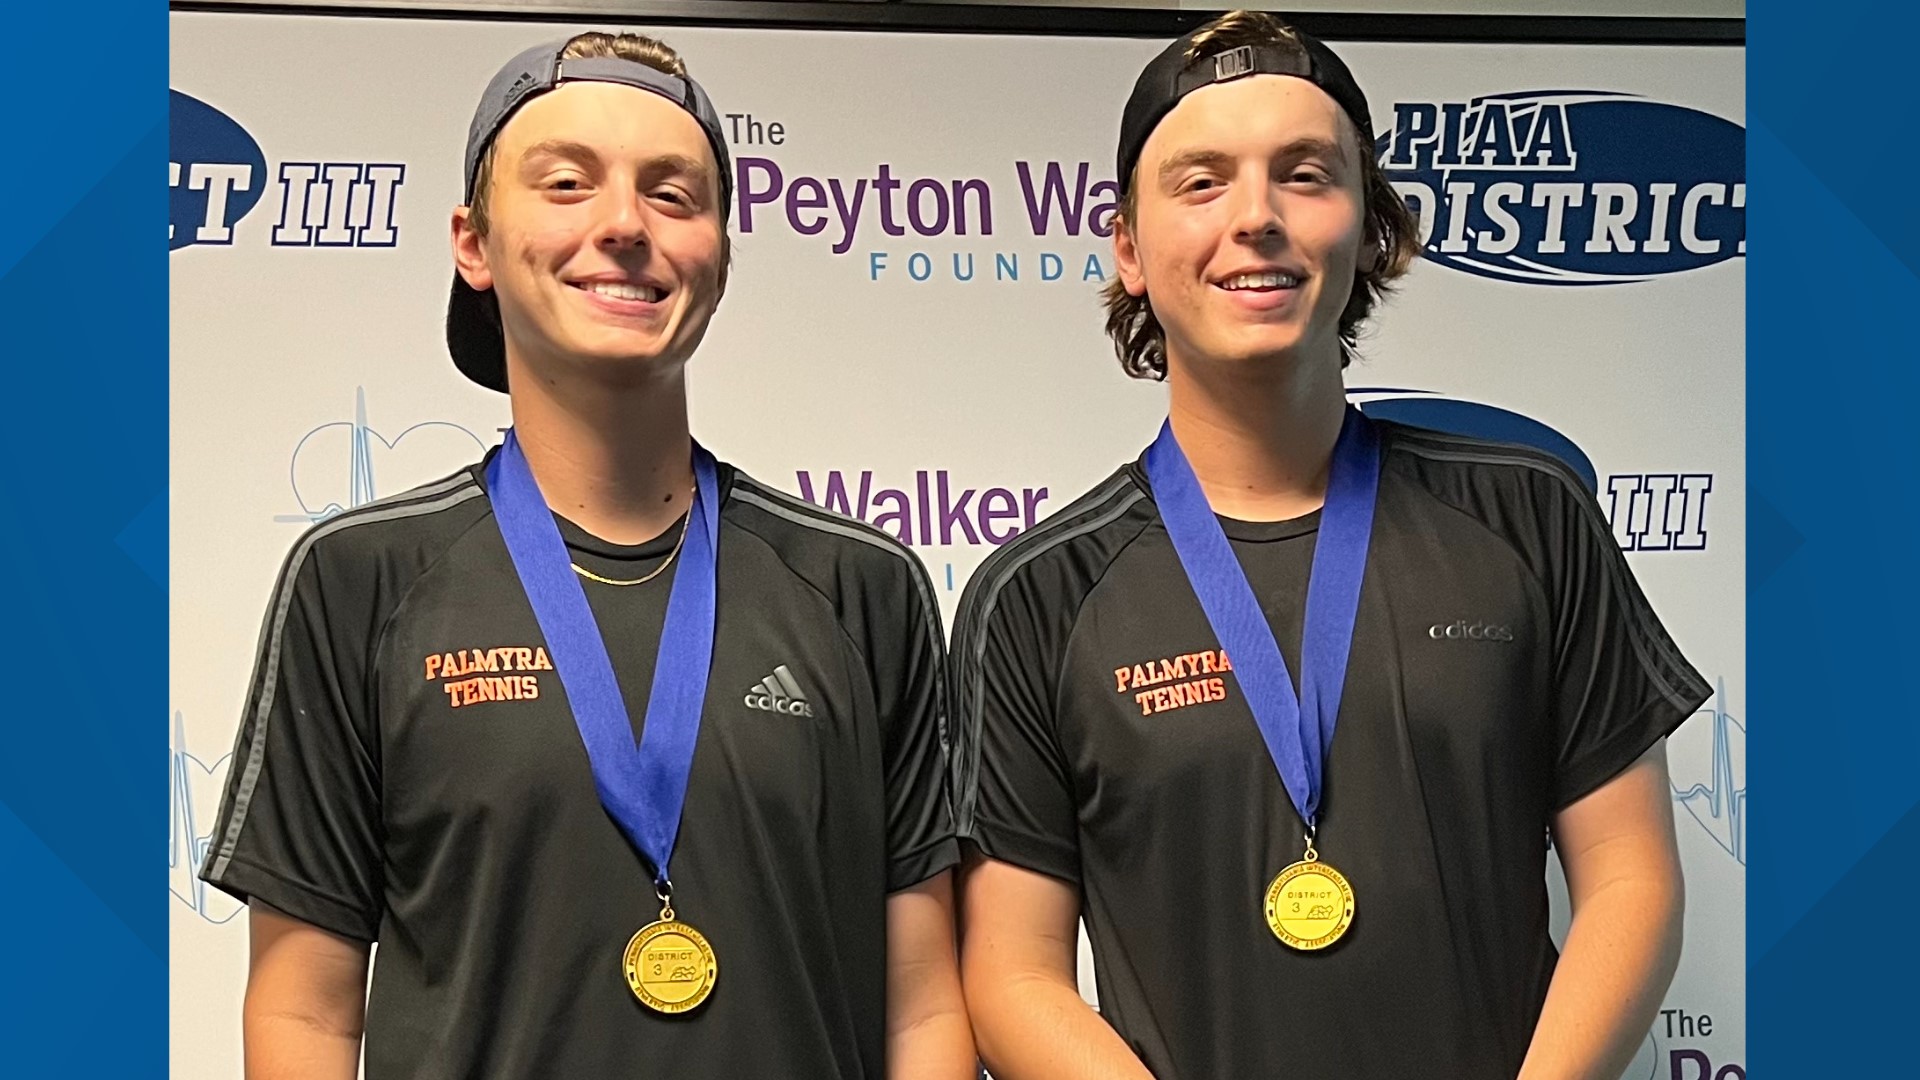 Aidan and Tyler continue to rack up the hardware as the faces of Palmyra athletics and look forward to the future